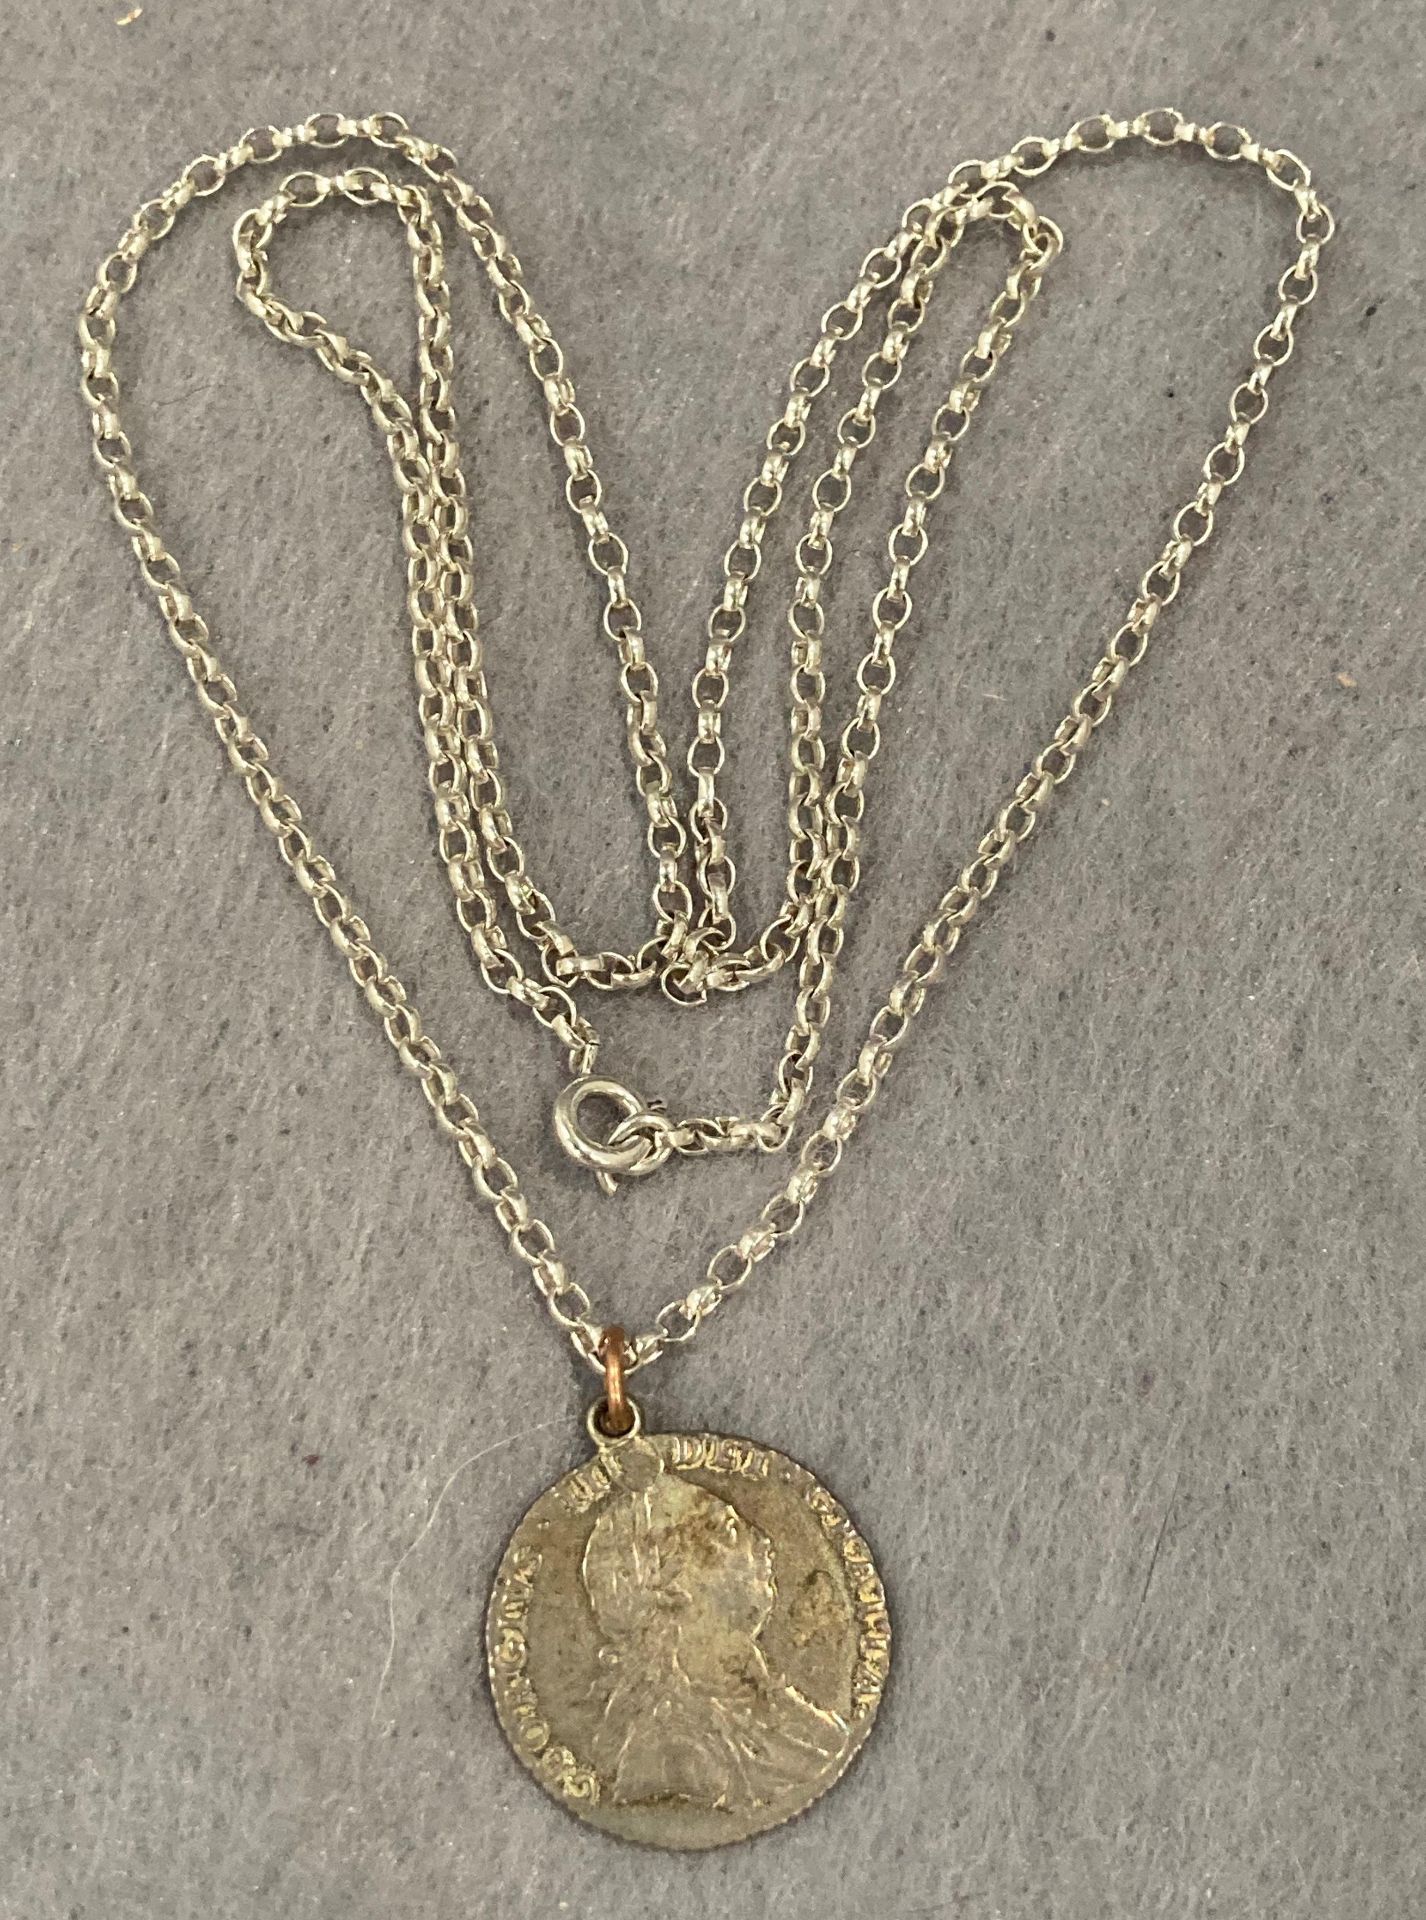 George III 1787 sixpence on sterling silver chain - Image 3 of 3